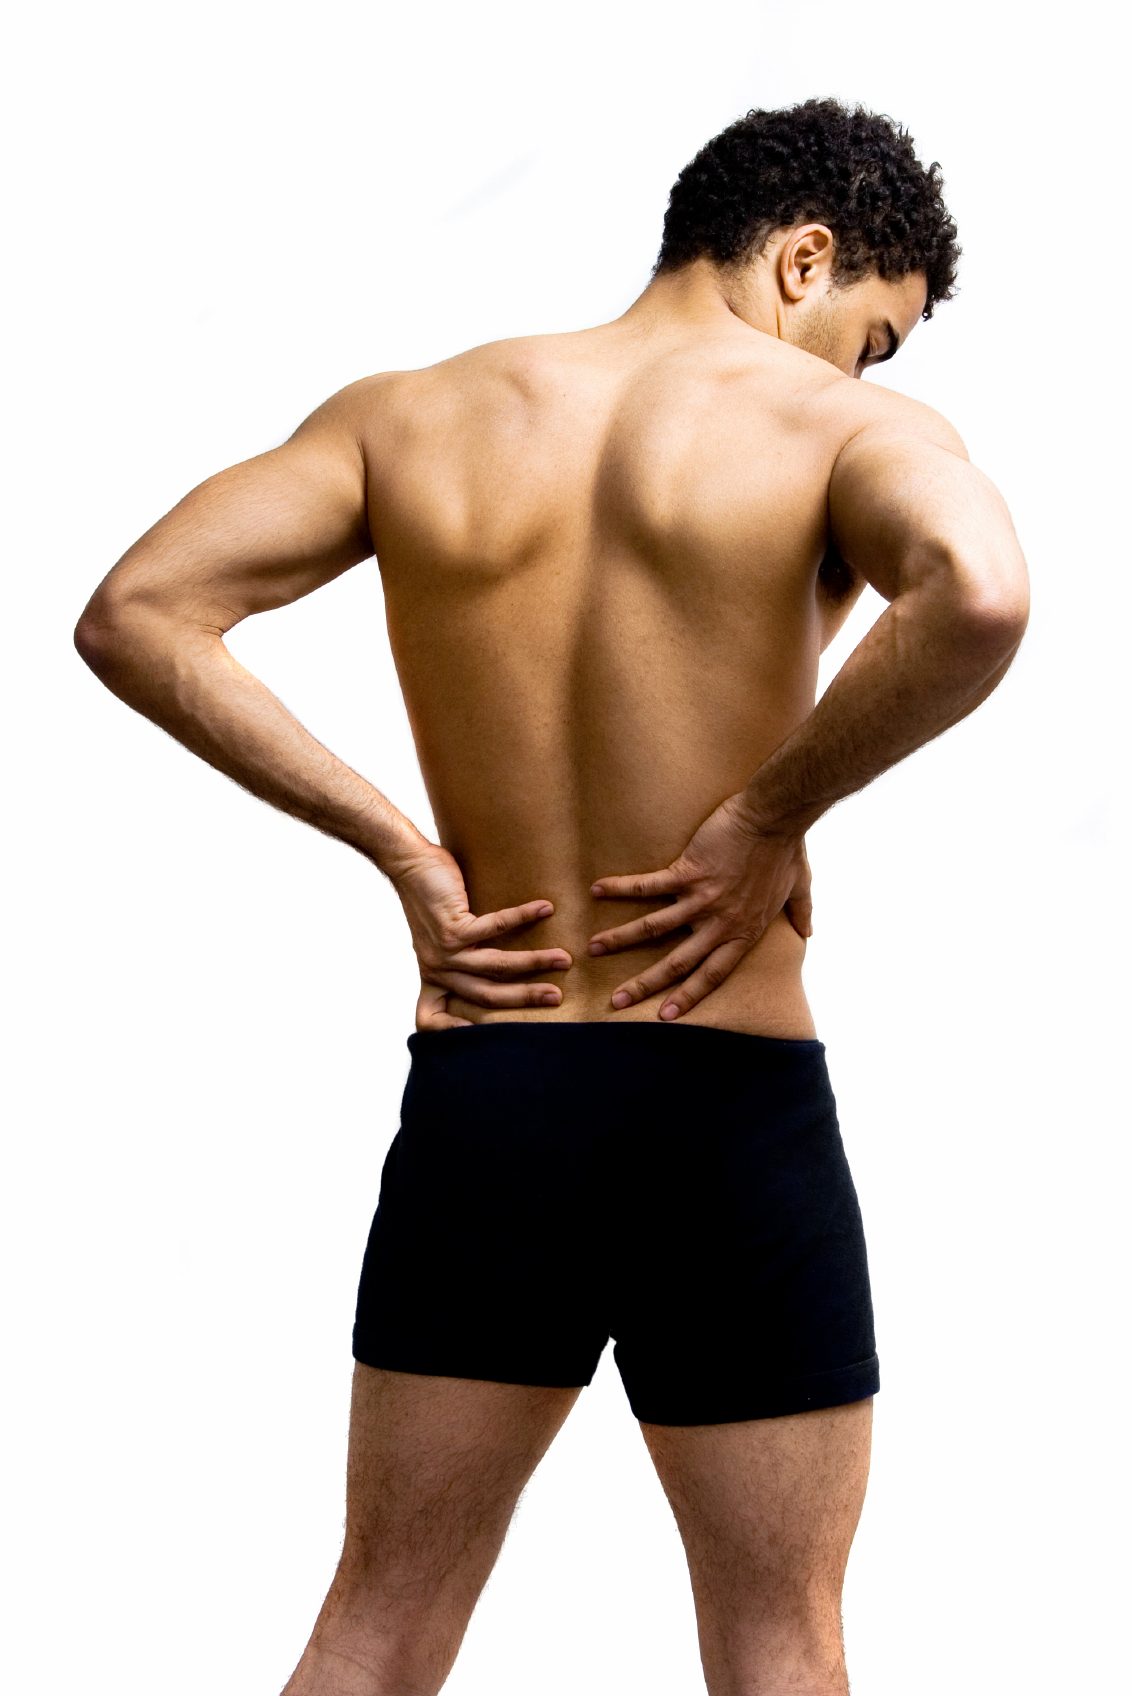 Causes of lower back pain can be lifting heavy loads, laughing, coughing  but not sex, George Institute study finds